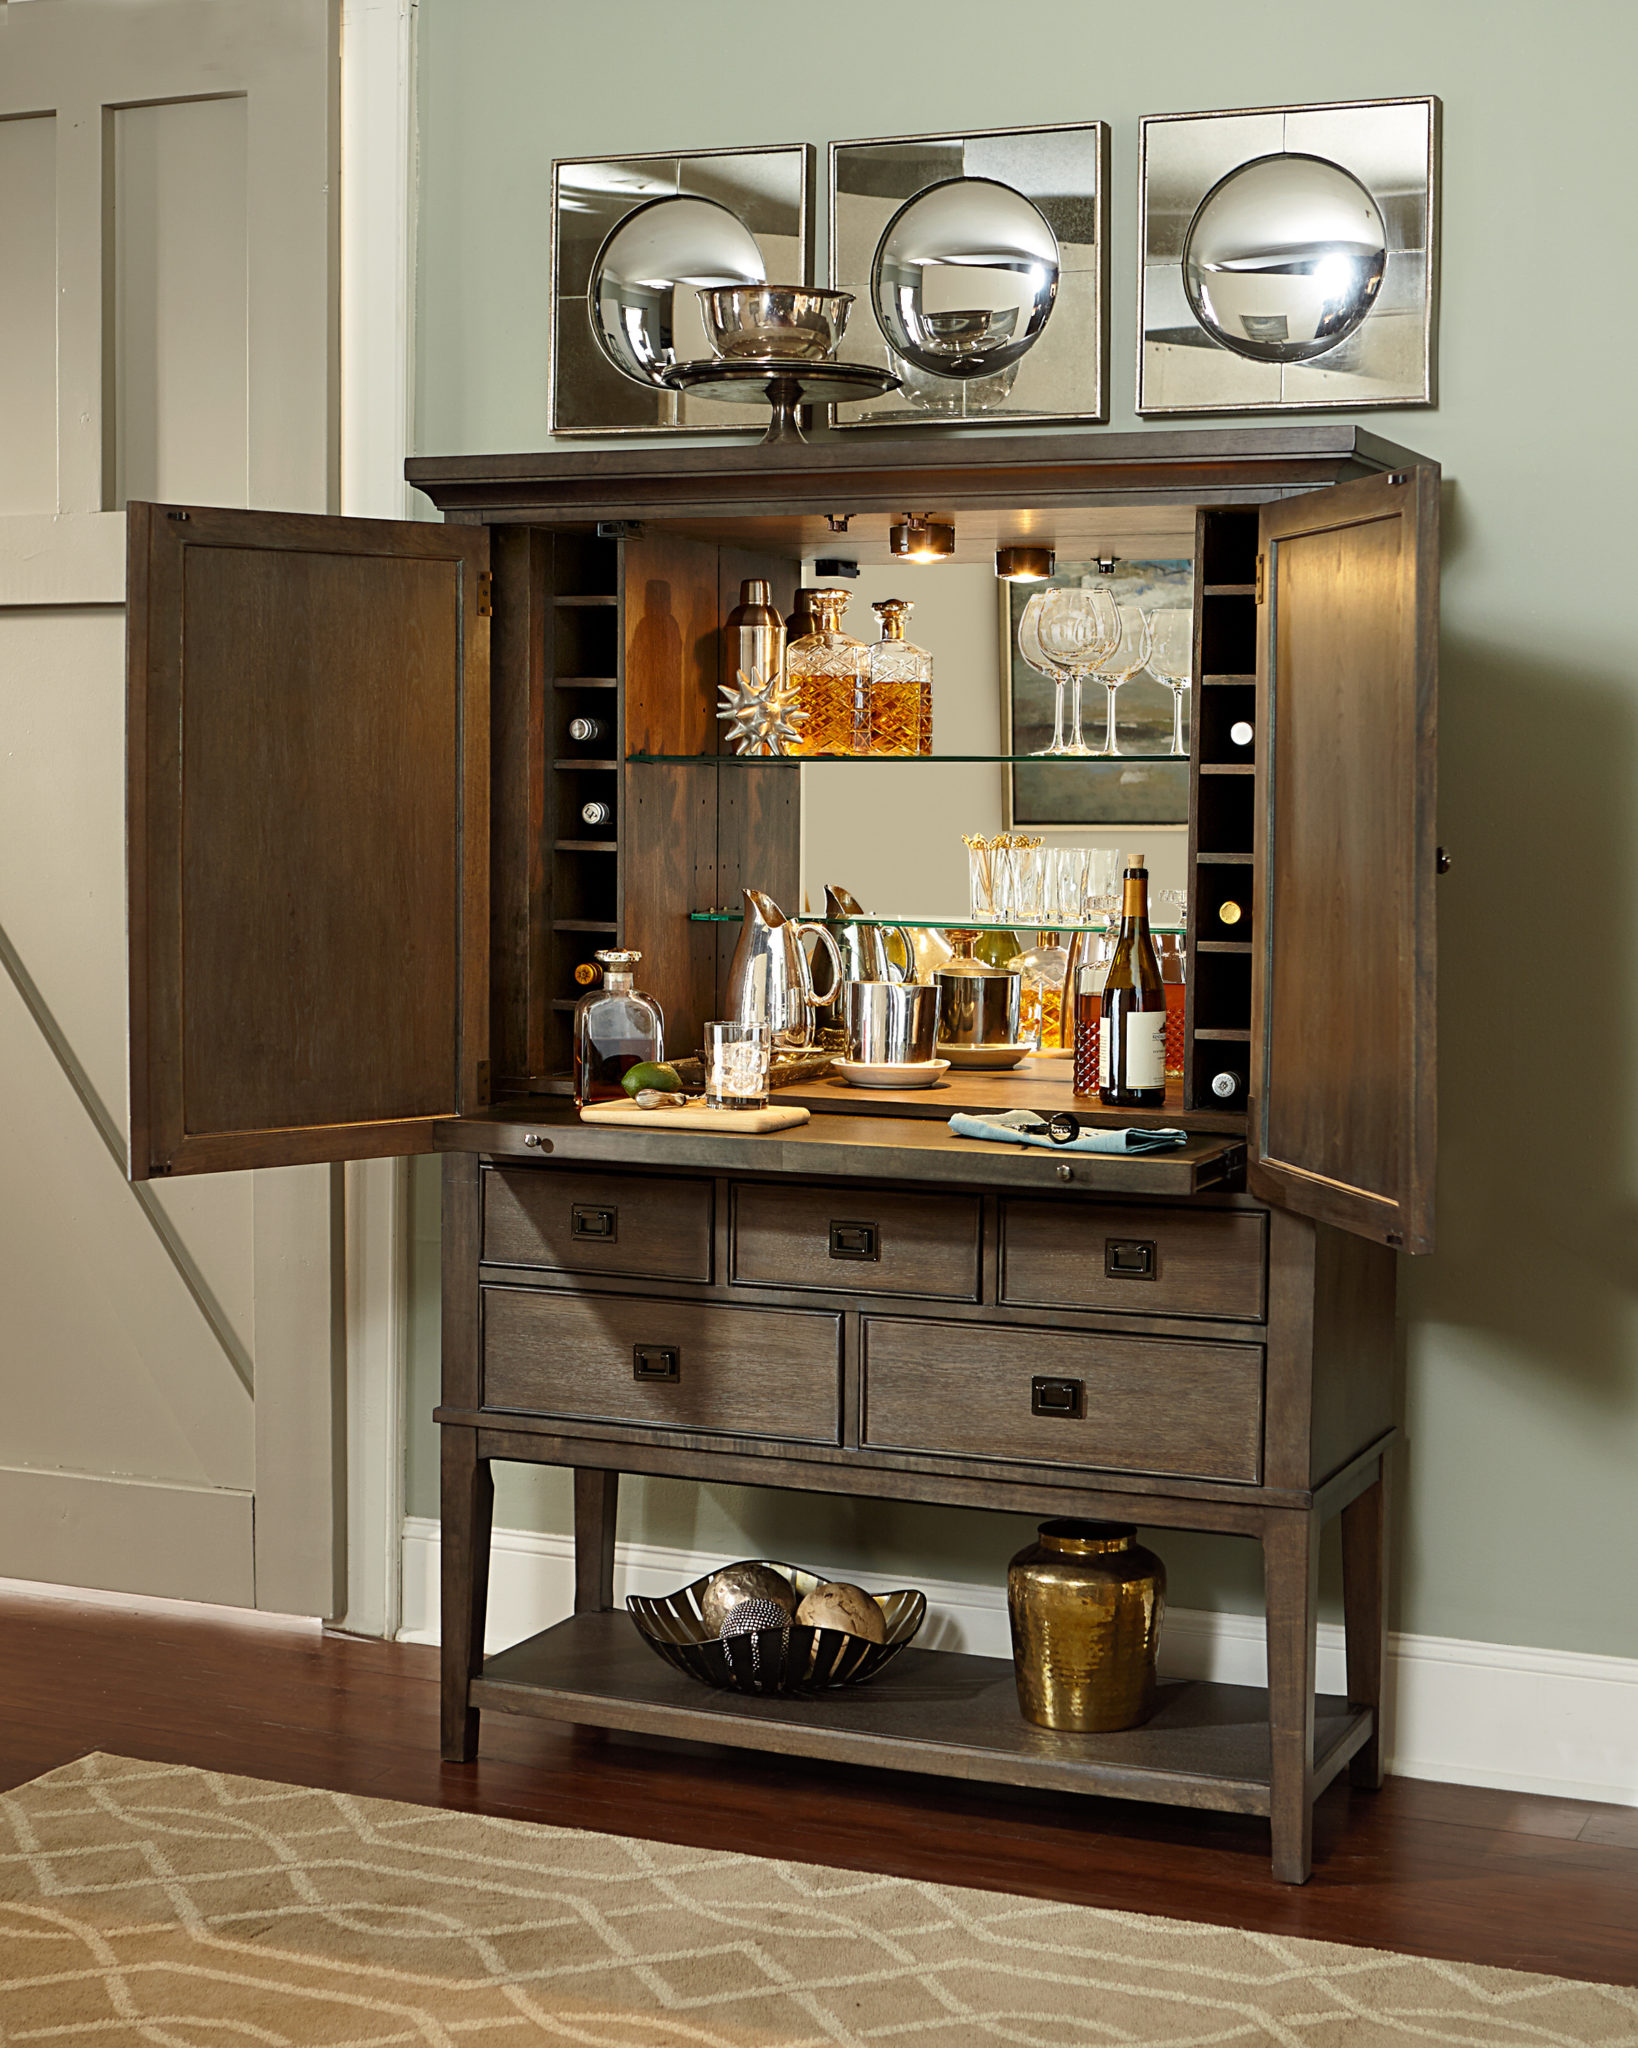 Creating a convenient bar cart for game day